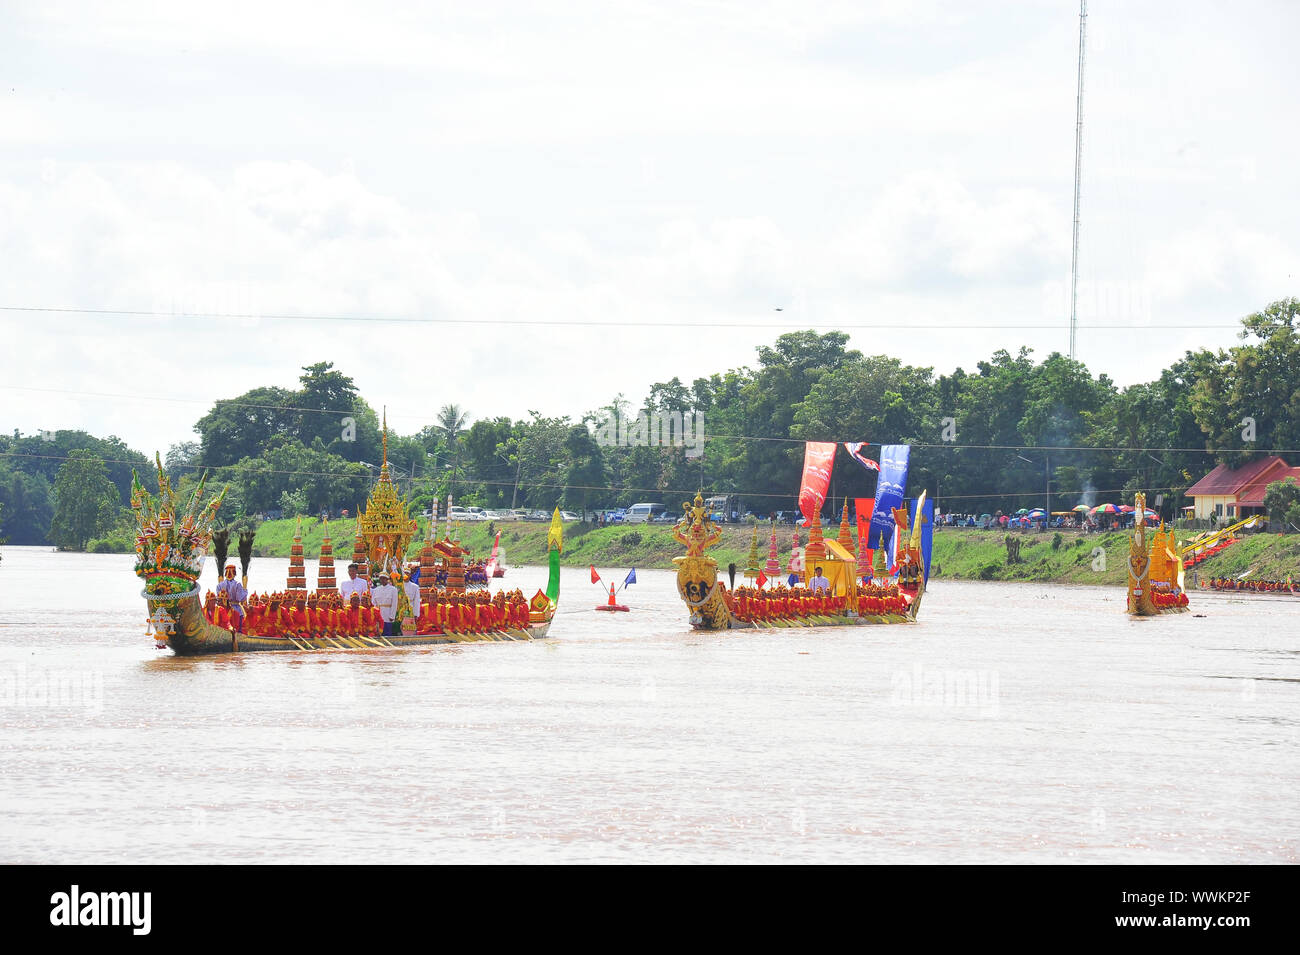 https://c8.alamy.com/comp/WWKP2F/phichit-thailand-7-september-2019-phichit-boat-racing-is-a-traditional-event-of-long-standing-during-september-each-year-on-the-nan-river-in-fr-WWKP2F.jpg